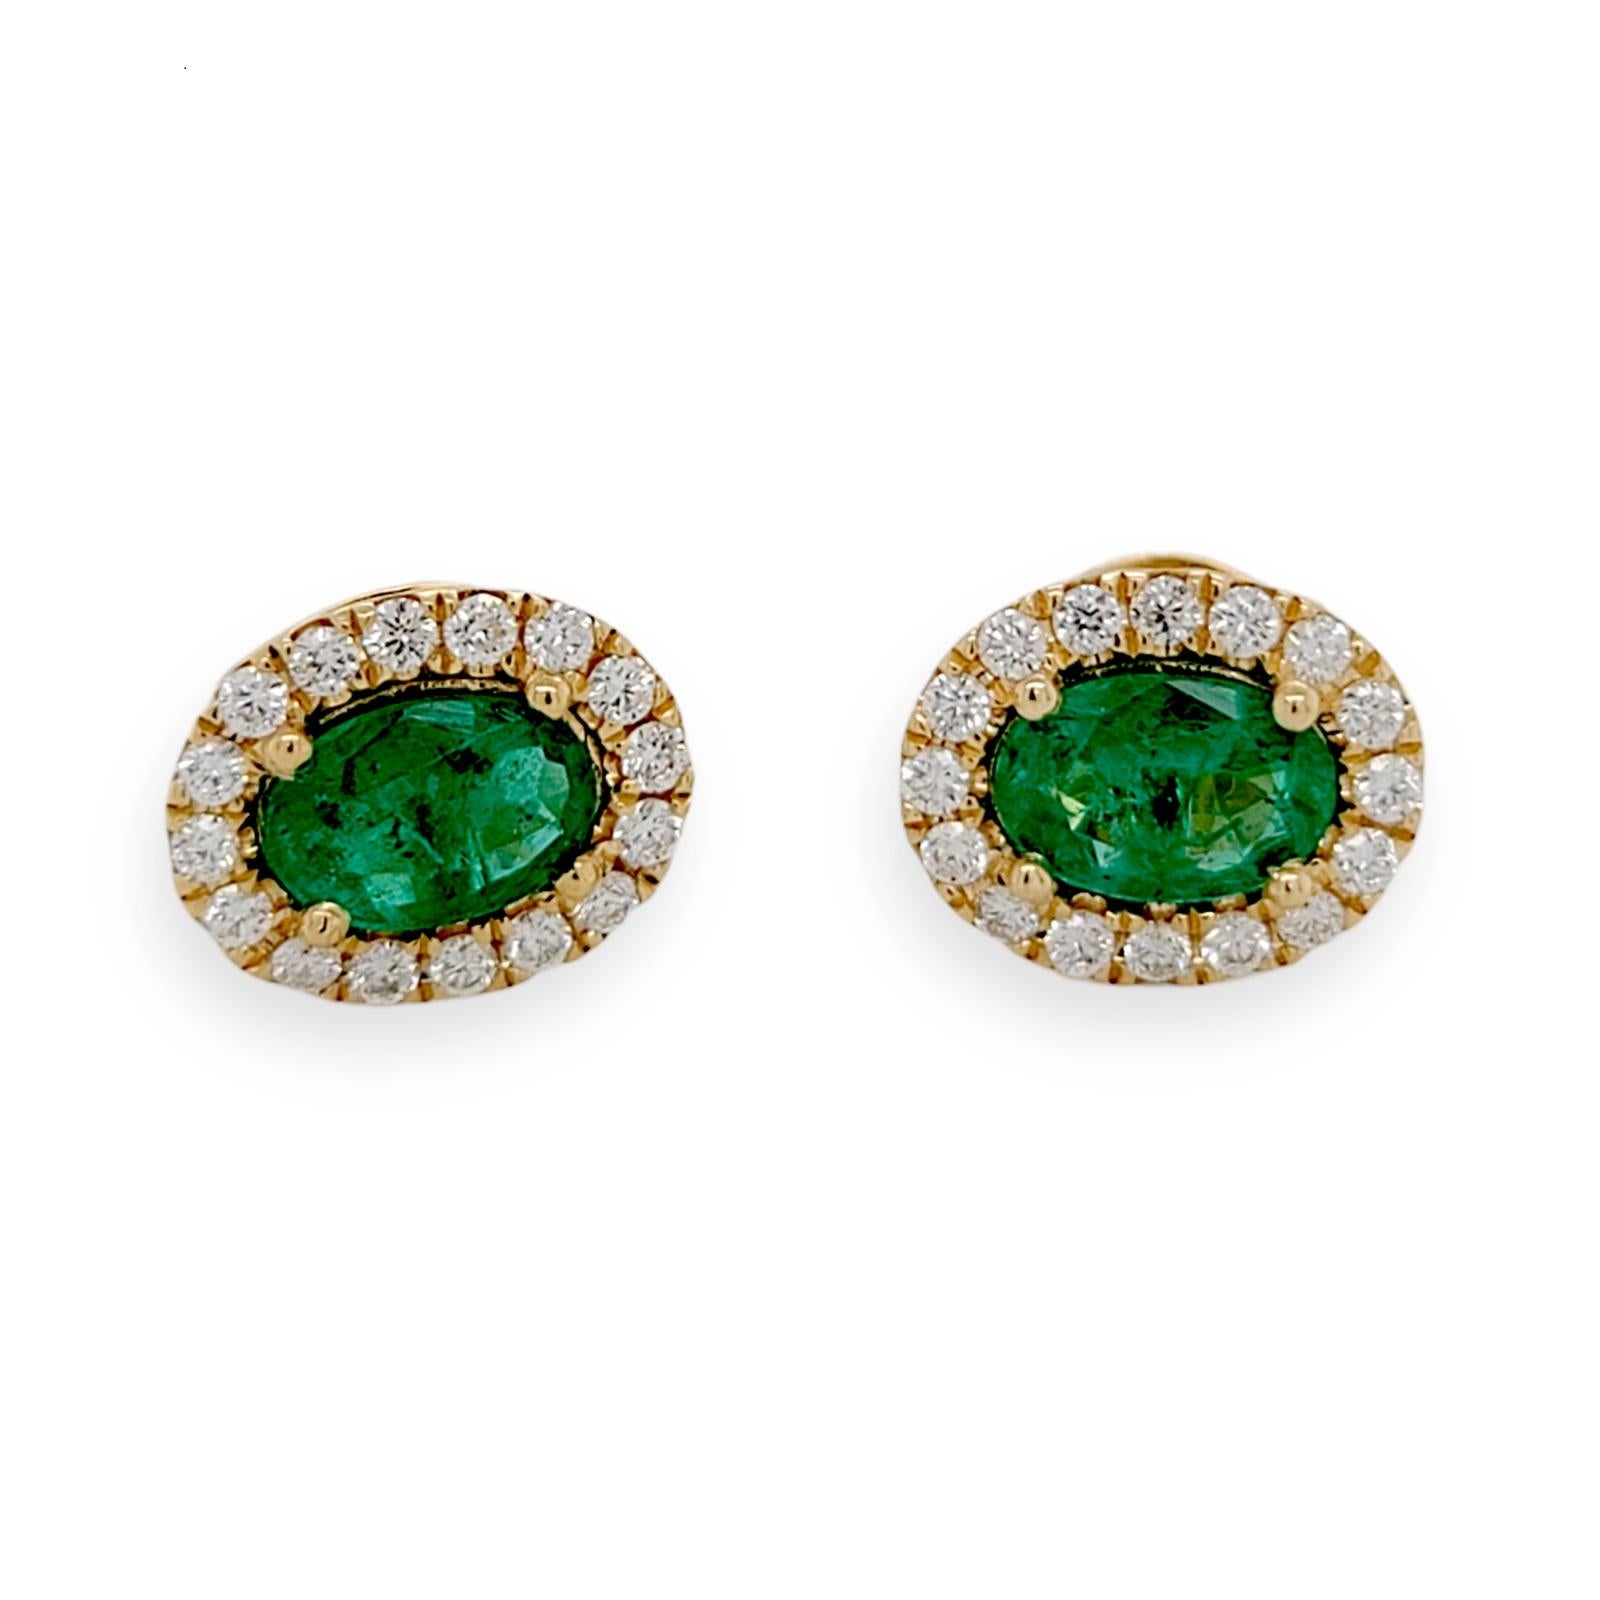 Round Cut 0.88 CT Colombian Emerald & 0.27 CT Diamonds in 14K Yellow Gold Stud Earrings For Sale